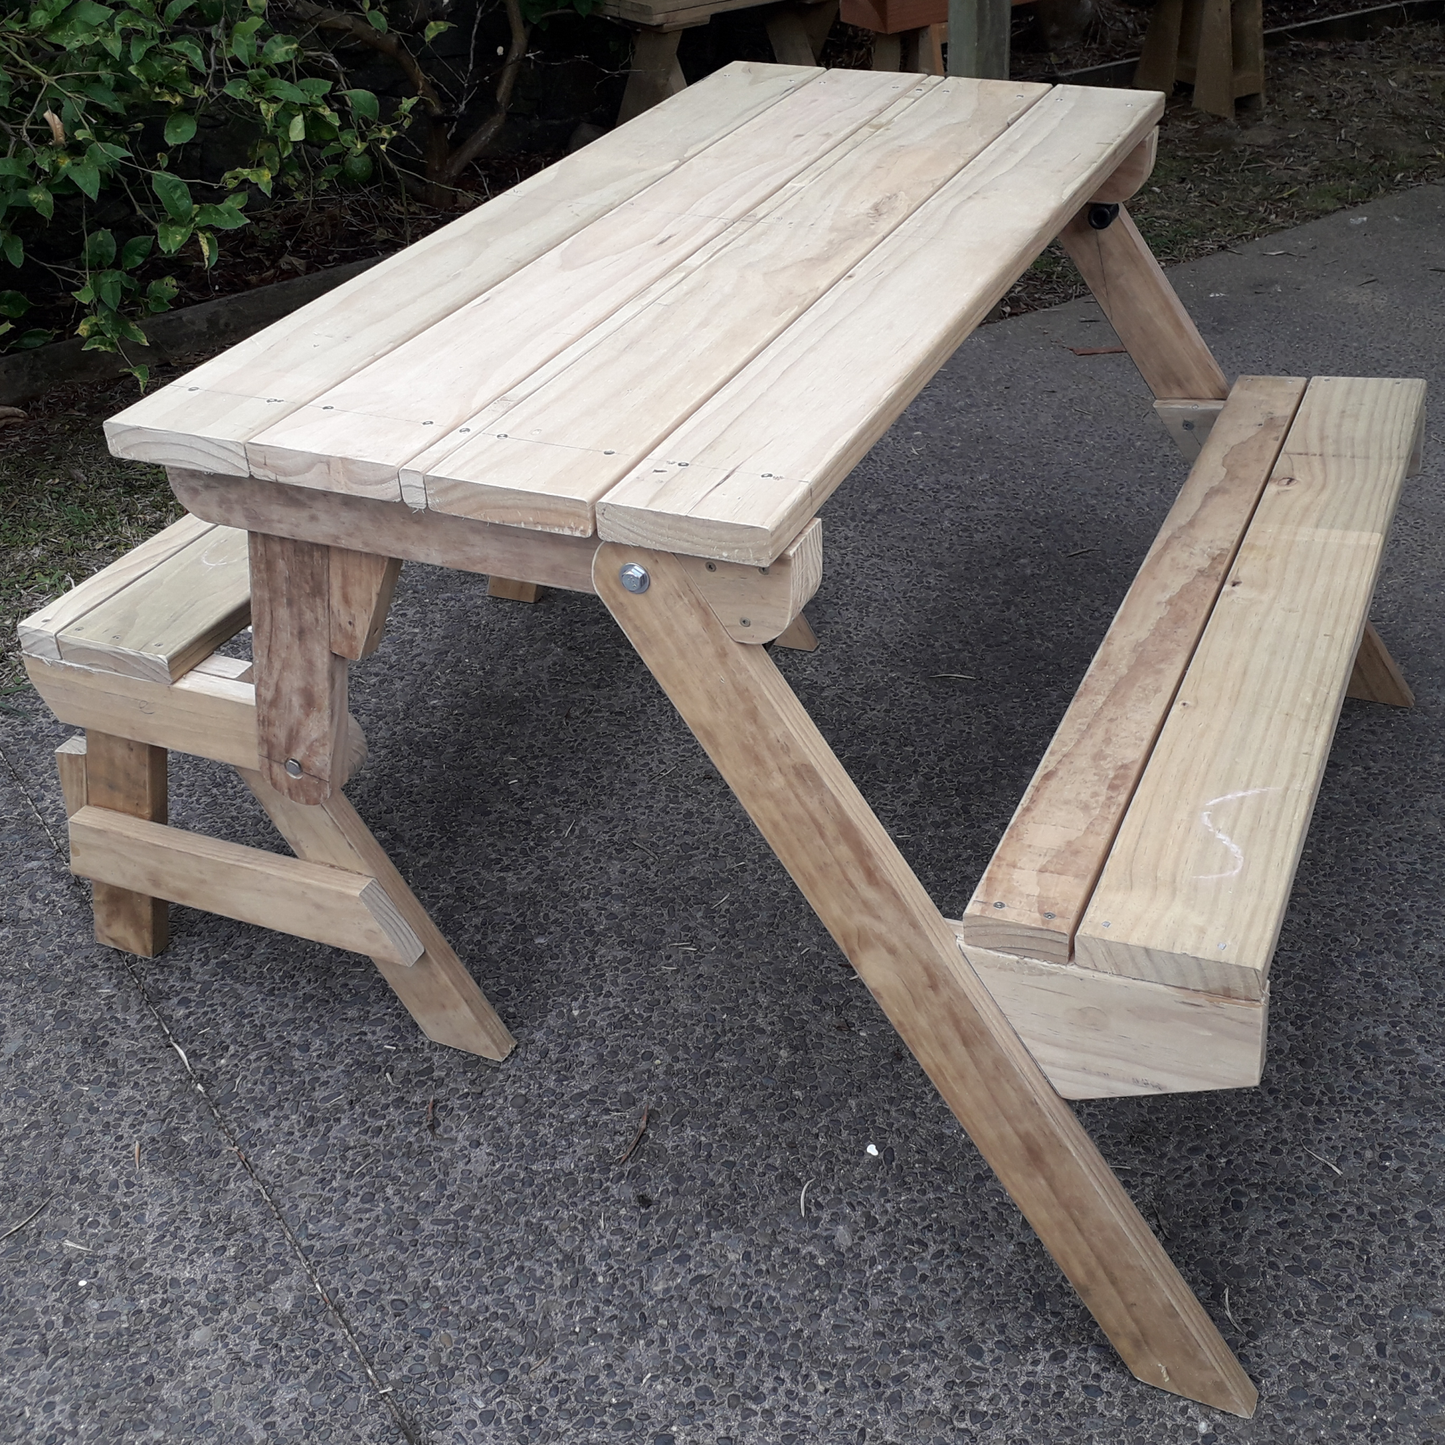 DIY plans to build a metamorphic wooden picnic table